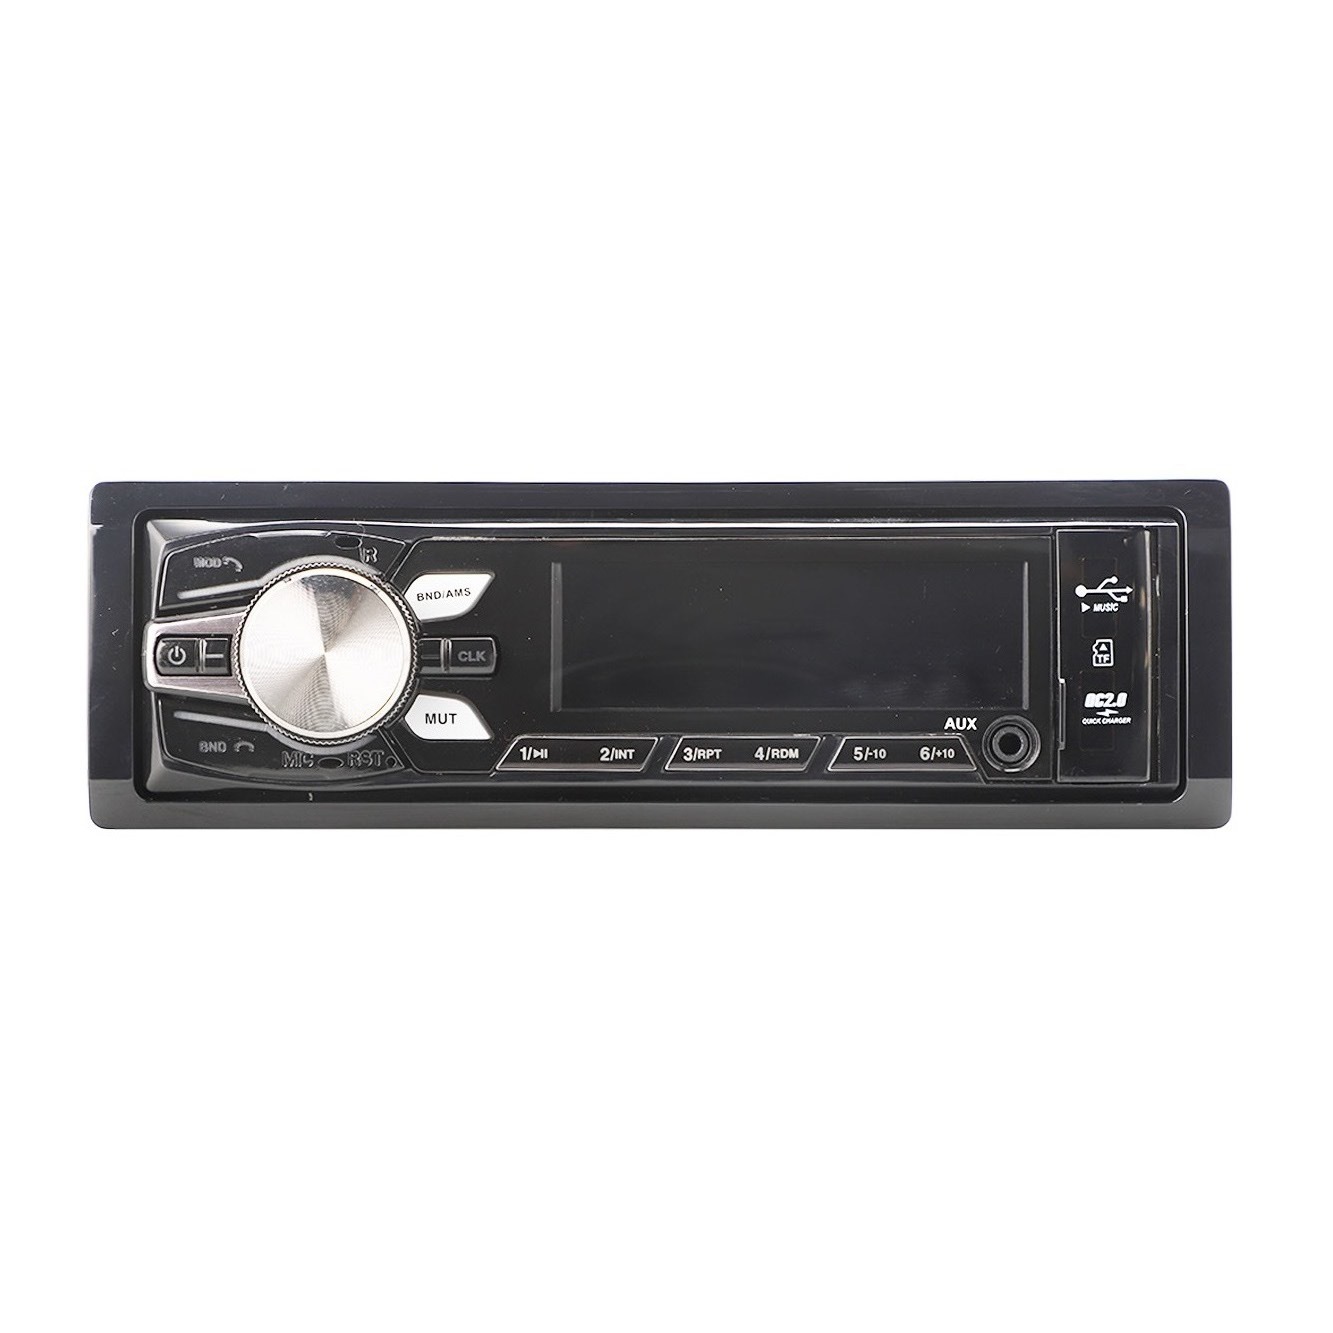 Fixed Panel Player Car Stereo Car Video Player Car Audio Sets FM Transmitter Audio One DIN Fixed Panel Car MP3 Player